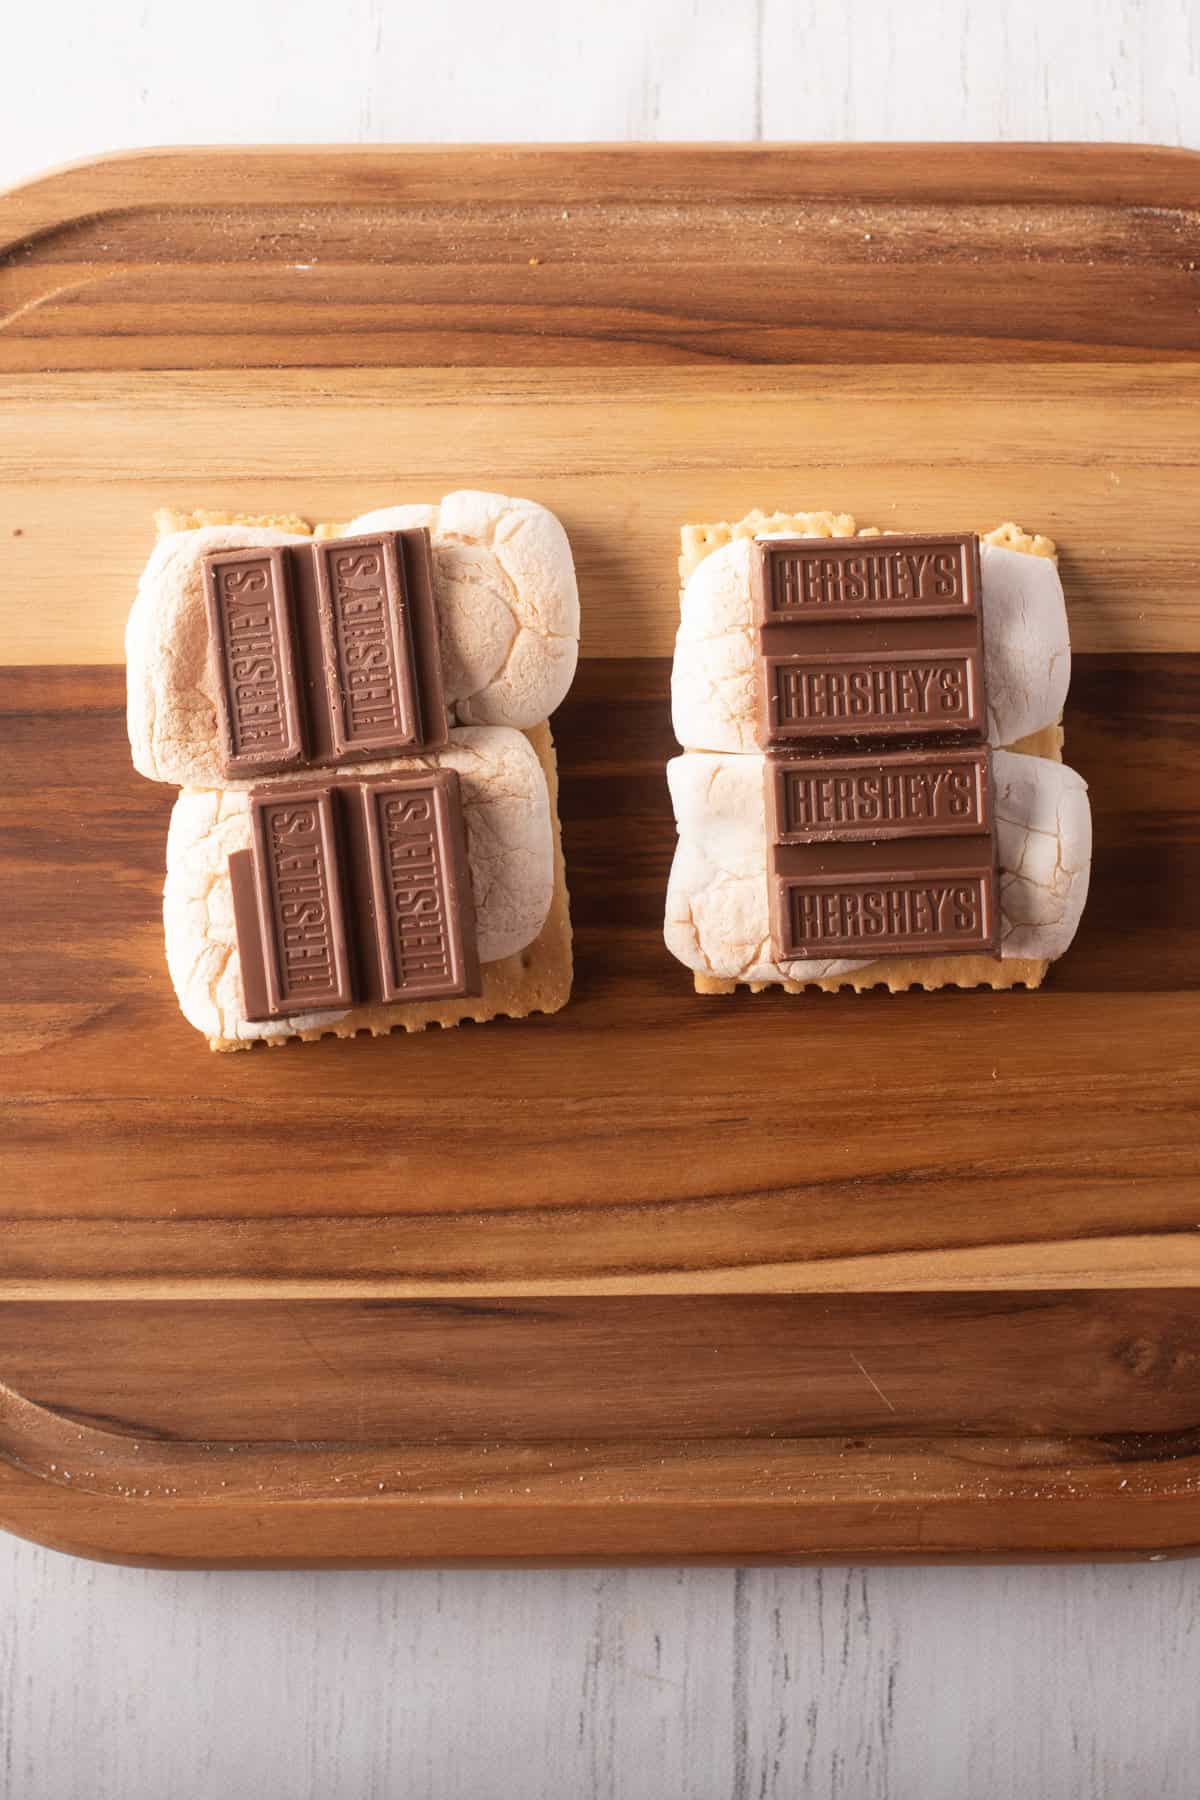 Overhead view of two graham crackers with marshmallows and chocolate pieces on top, placed above a wooden board.